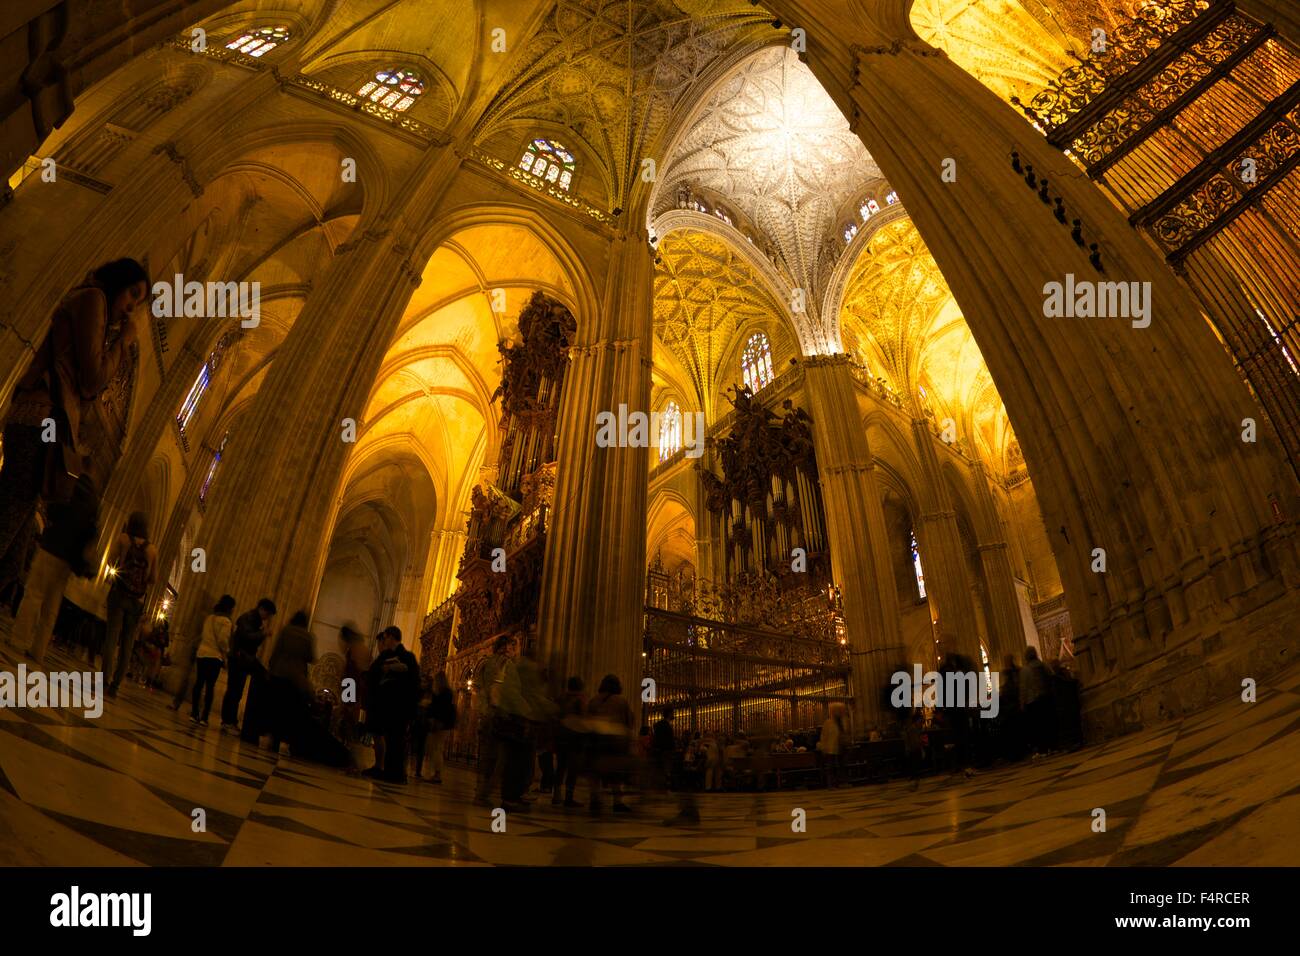 Interior of Nave, Seville Cathedral, Catedral Sevilla, Andalucia, Spain, Europe Stock Photo